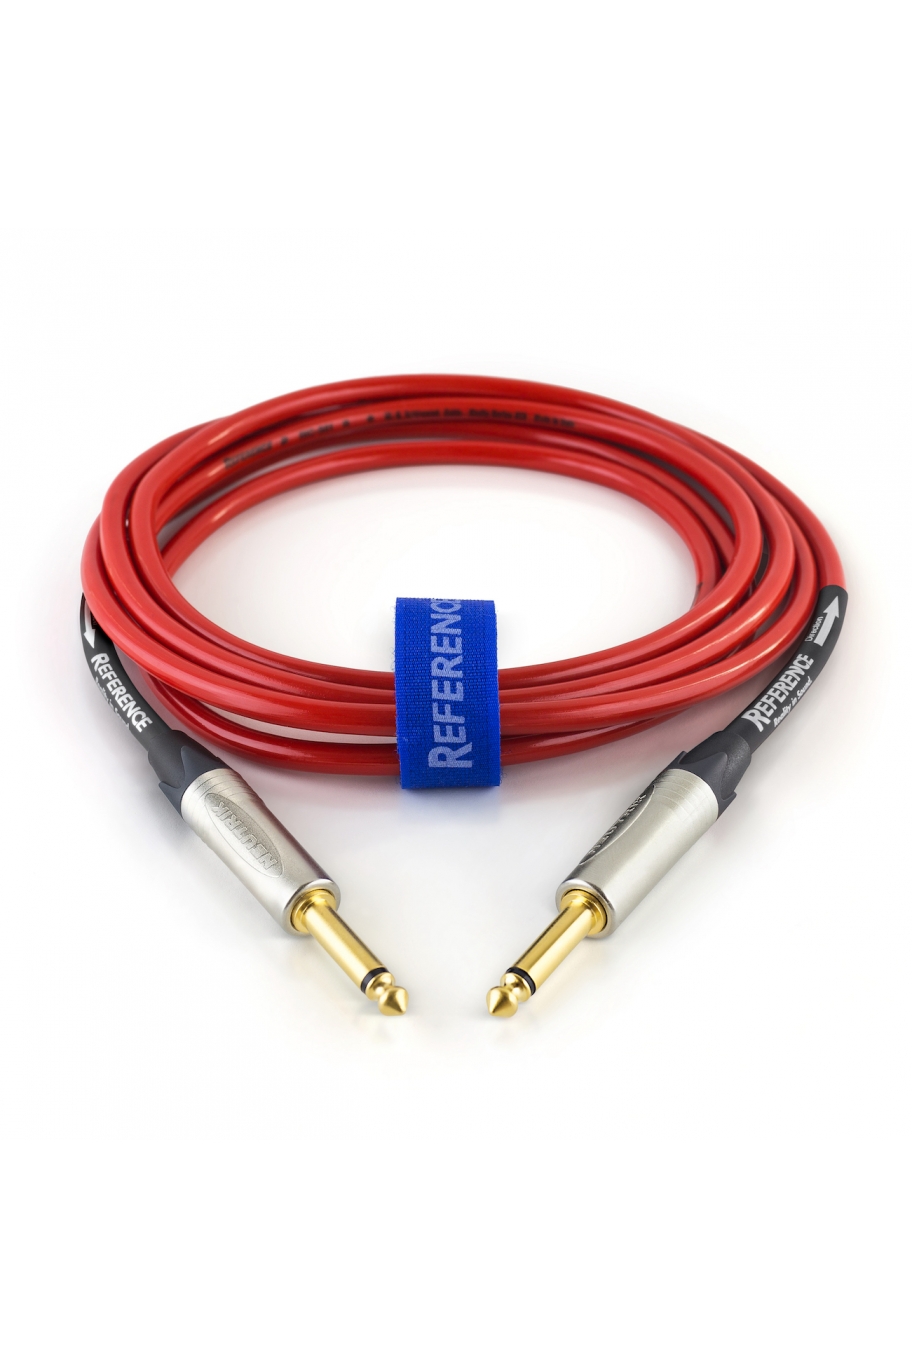 Reference Cables RIC-S01 R ロック用 赤 ストレート-L字 4.5m - おもちゃ